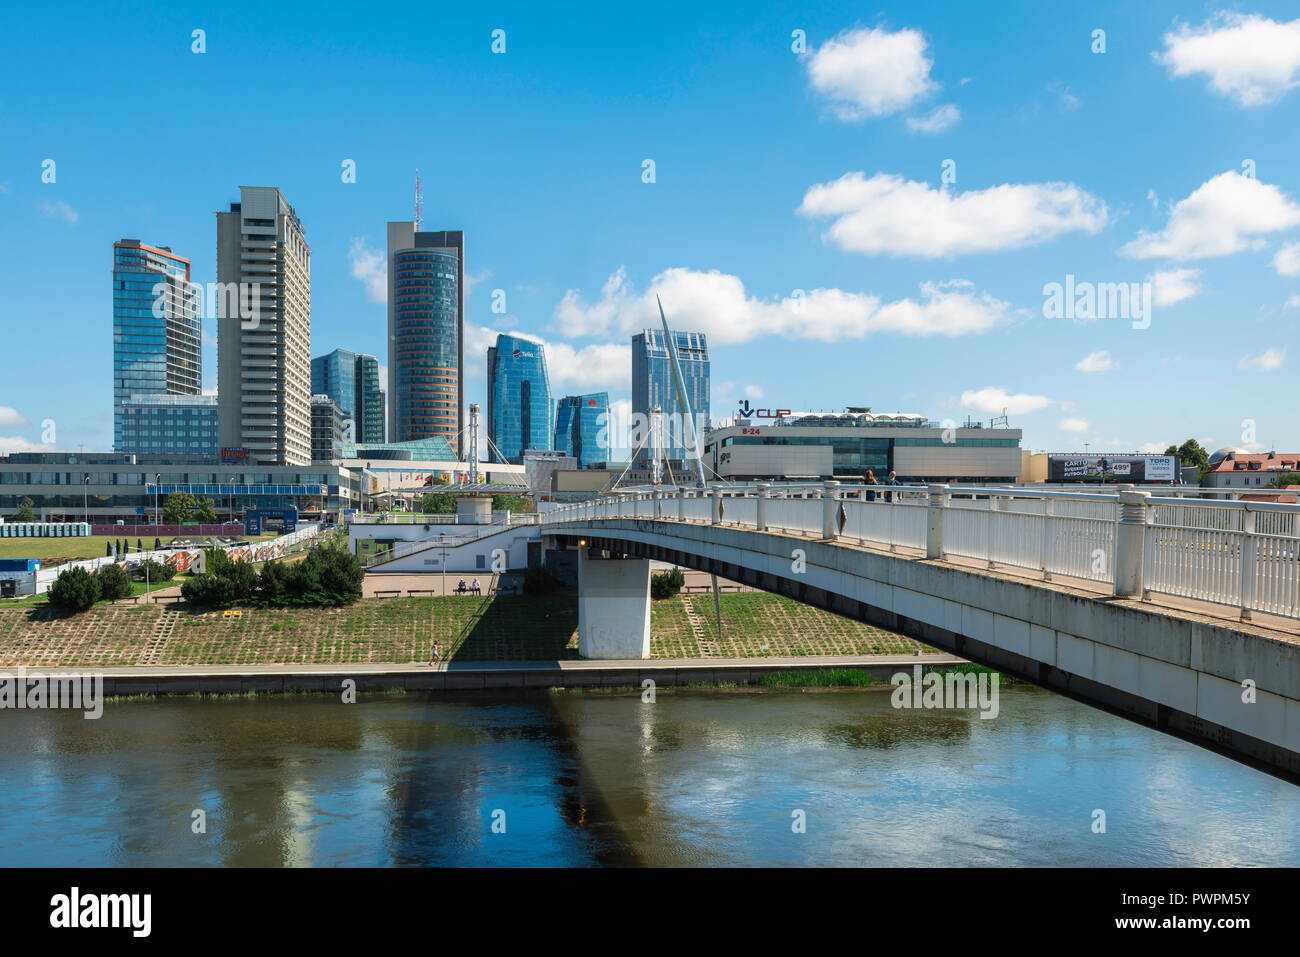 View of the White Bridge (Baltasis Tiltas) spanning the Neris River and the modern skyline of the Snipiskes business district in central Vilnius. Stock Photo